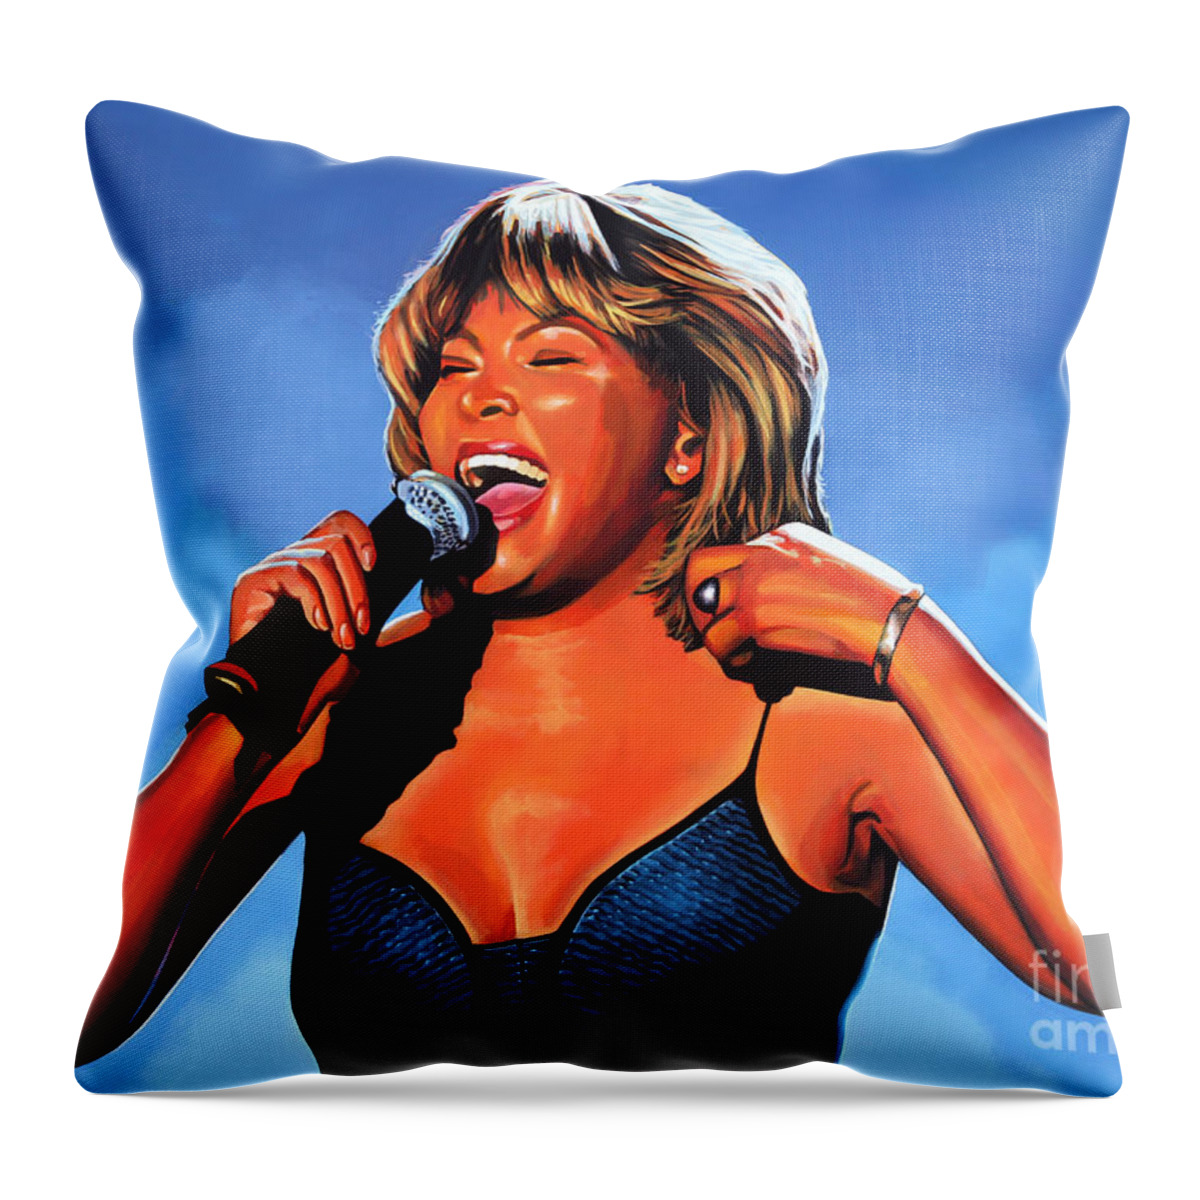 Tina Turner Throw Pillow featuring the painting Tina Turner Queen of Rock by Paul Meijering